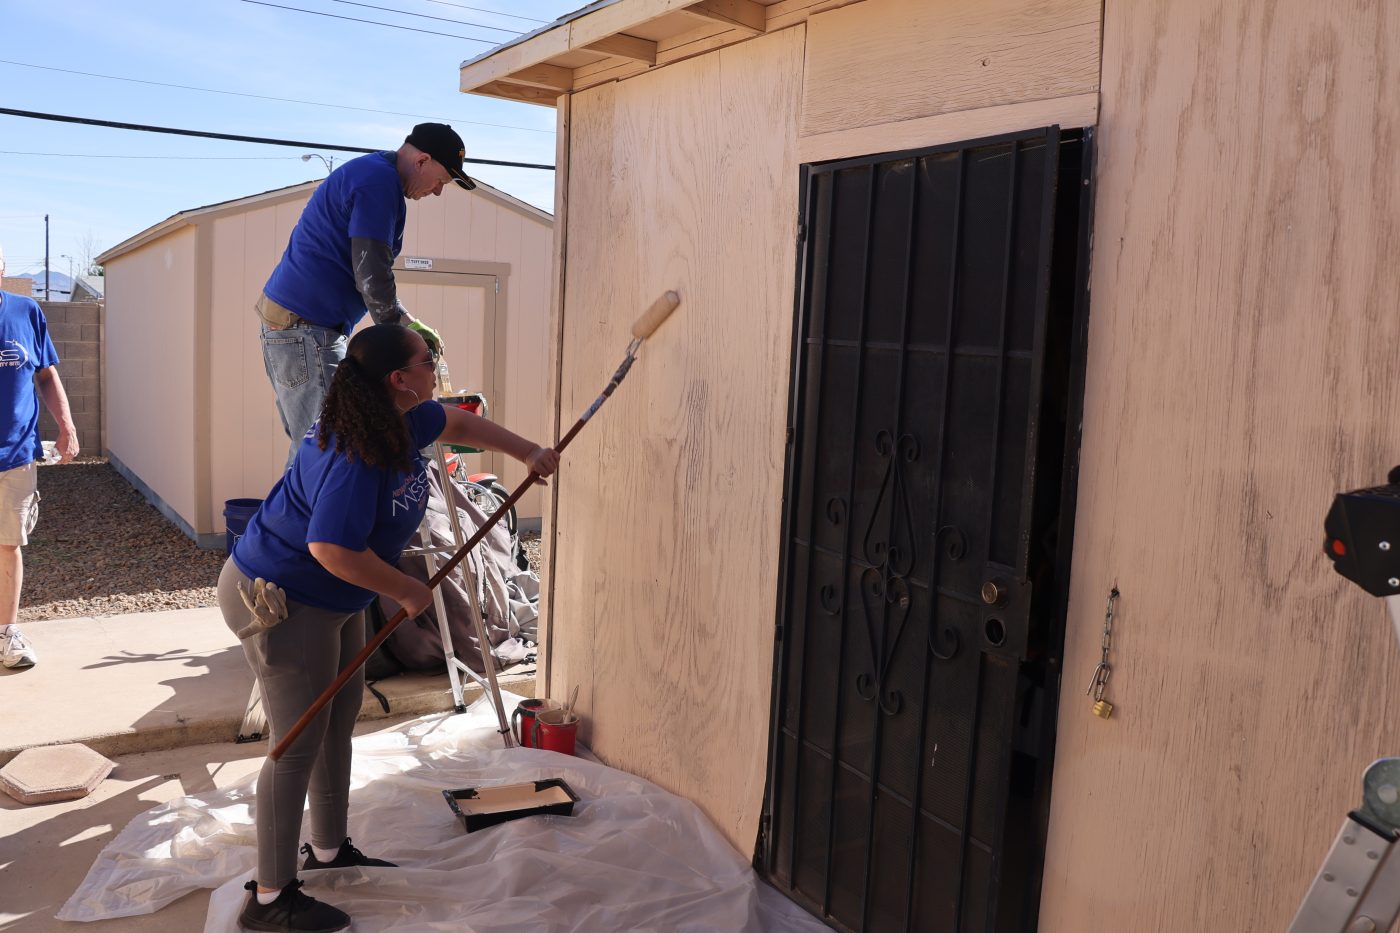 man in blue shirt on a ladder and women in blue shirt rolling paint on a shed